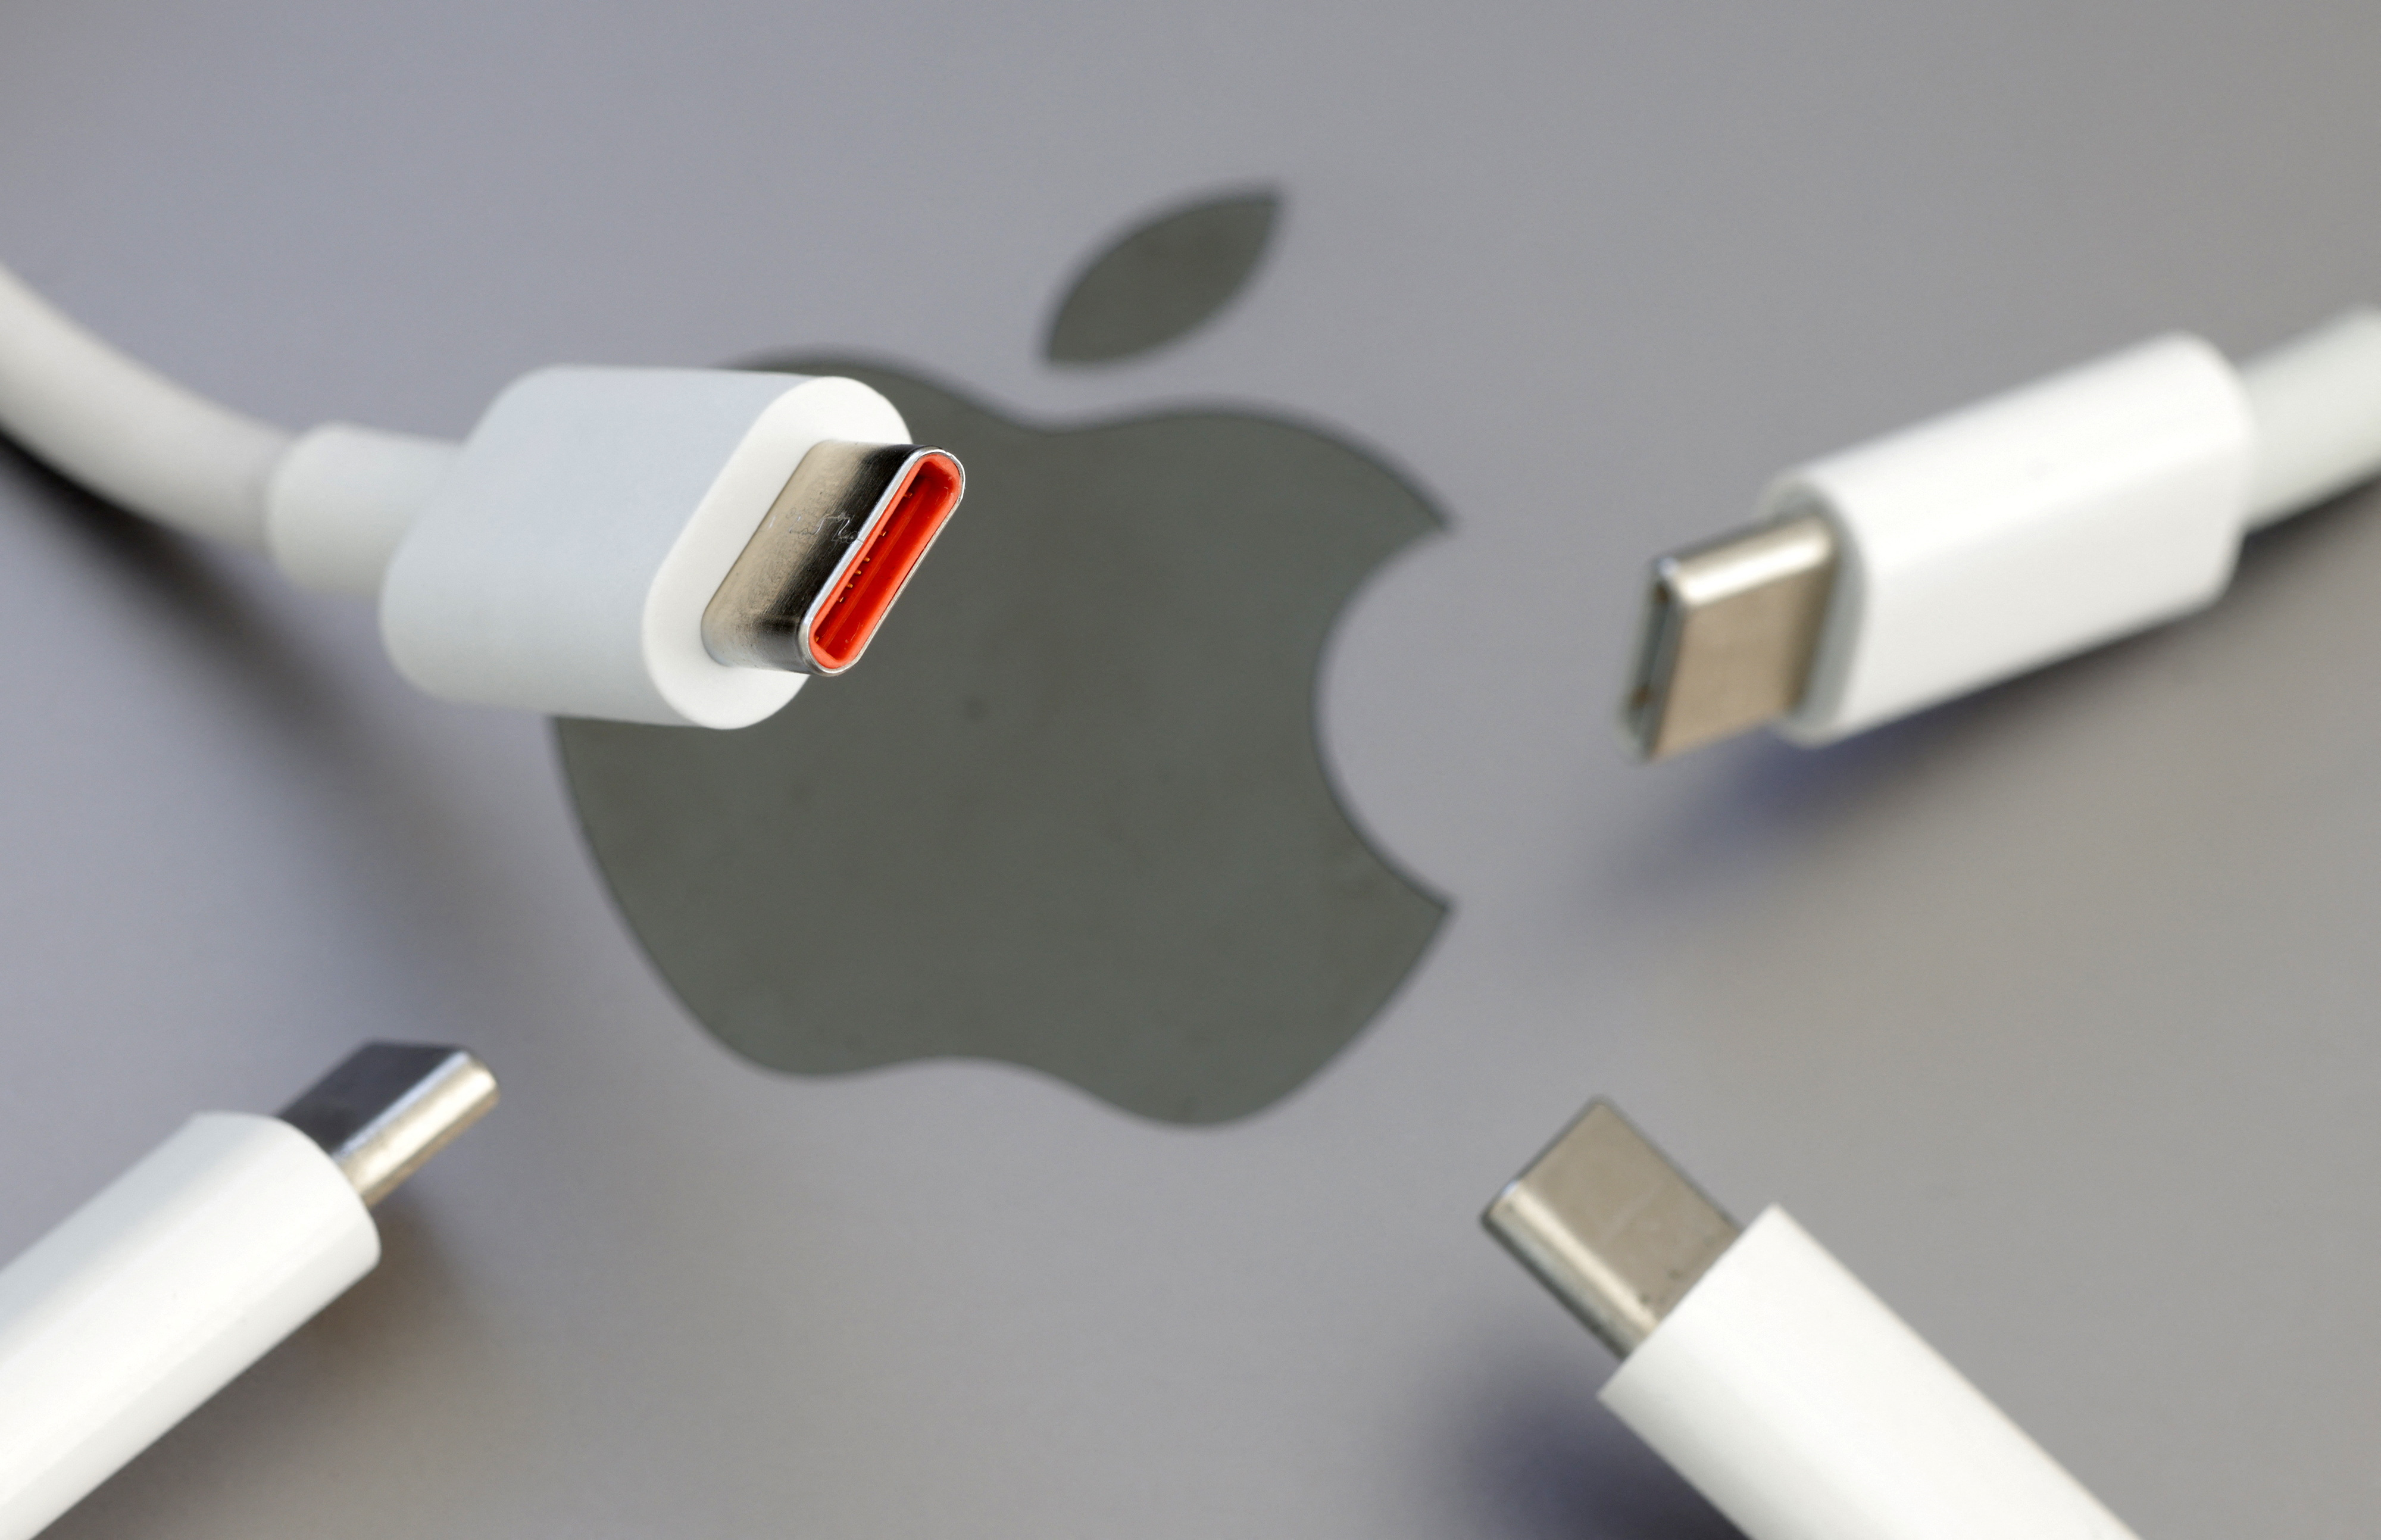 USB-C (USB Type-C) cables are seen near the Apple logo in this illustration taken October 27, 2022. REUTERS/Dado Ruvic/Illustration